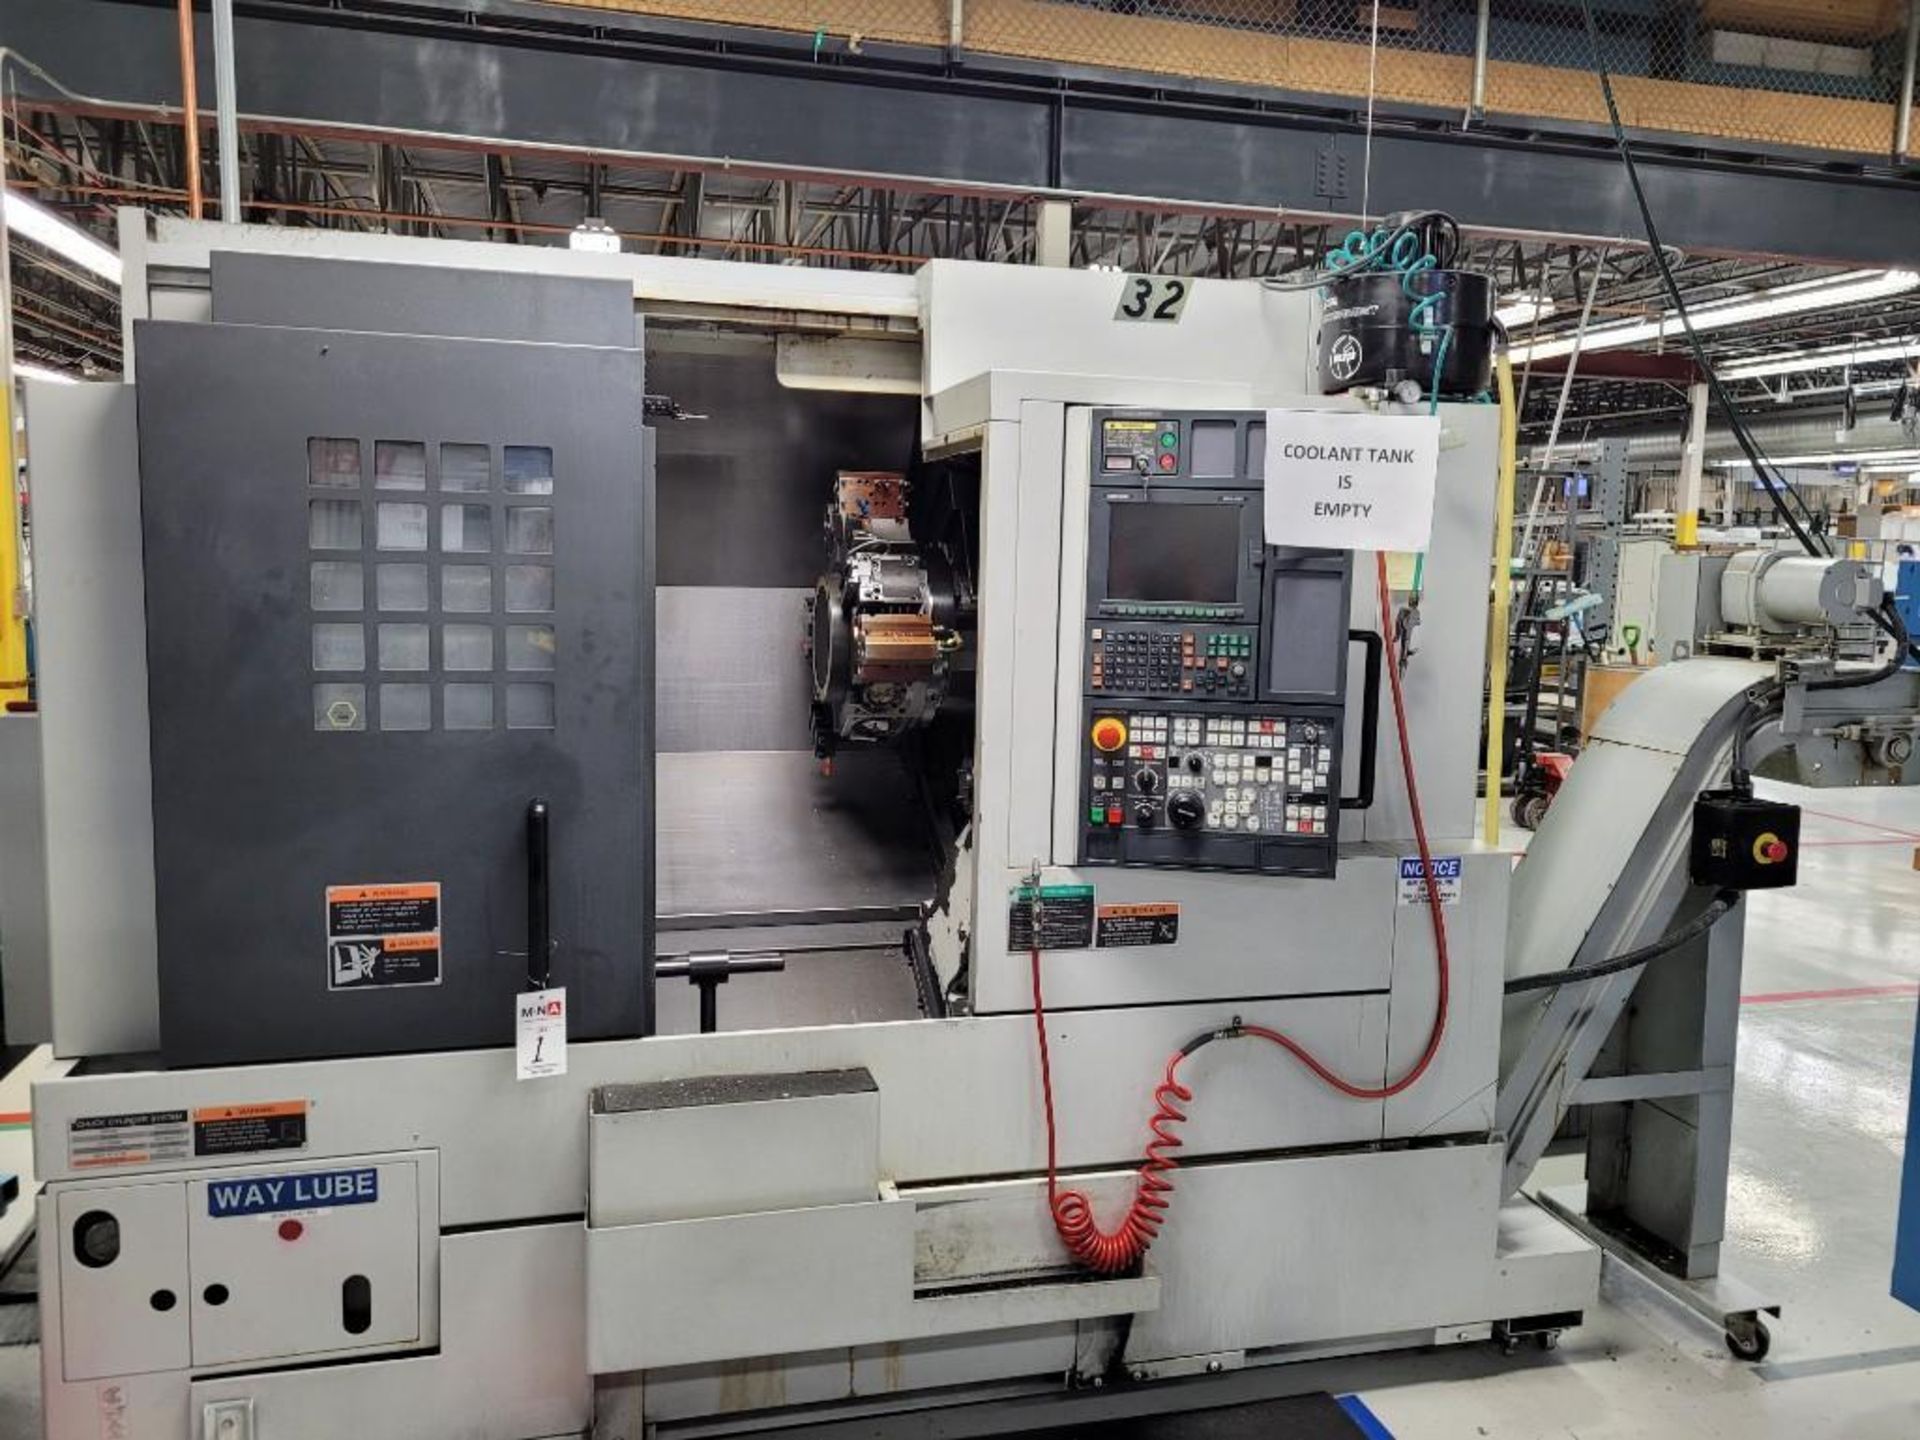 Mori Seiki NL2000Y CNC Turning Center, MSX-850 Control, Y-Axis, Collet Chuck, New 2005 - Image 4 of 14